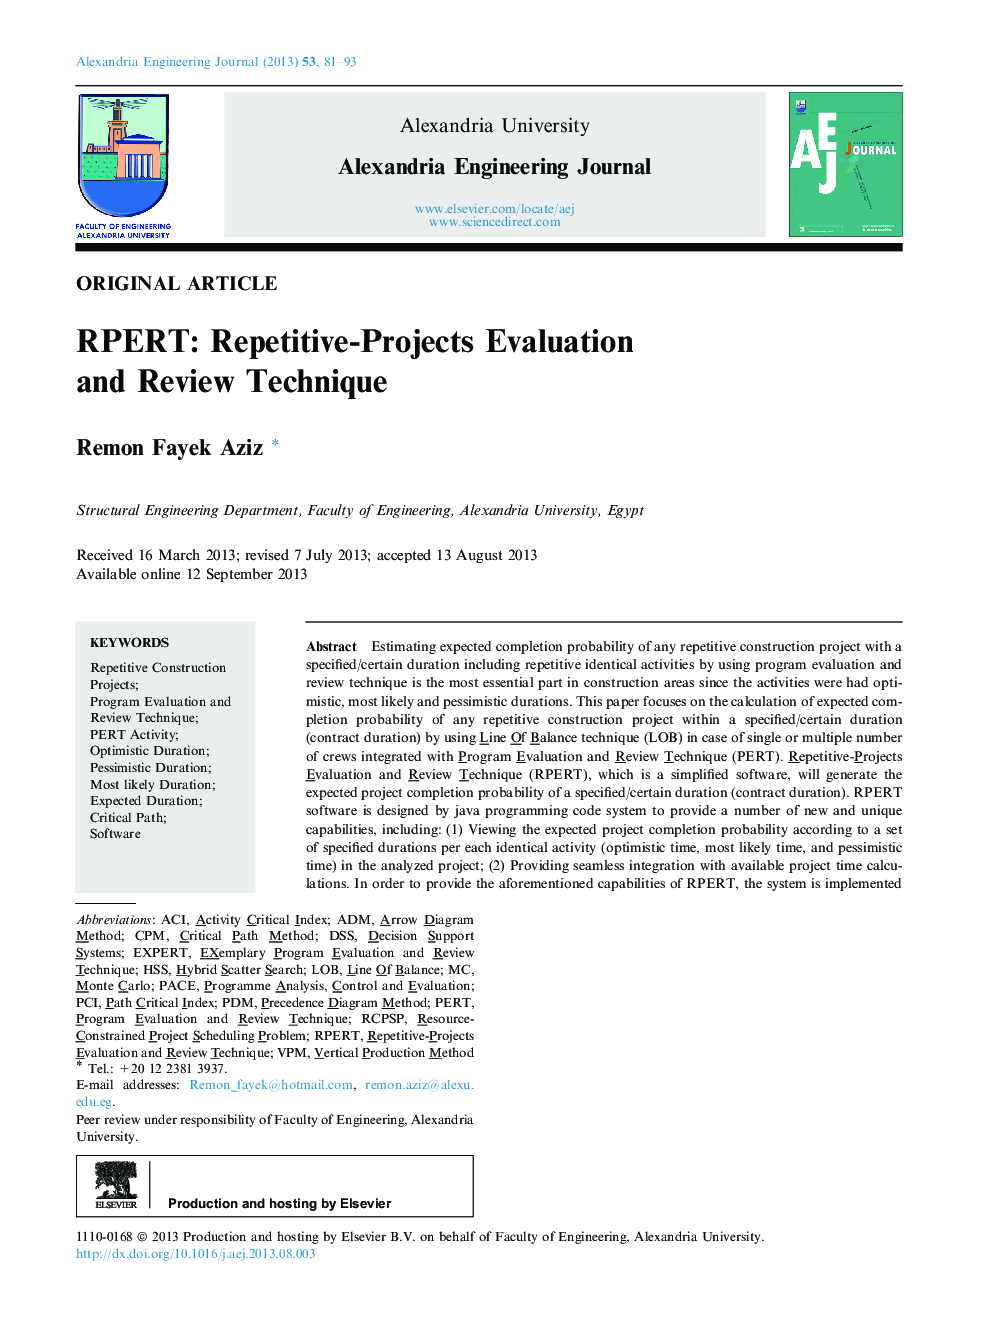 RPERT: Repetitive-Projects Evaluation and Review Technique 